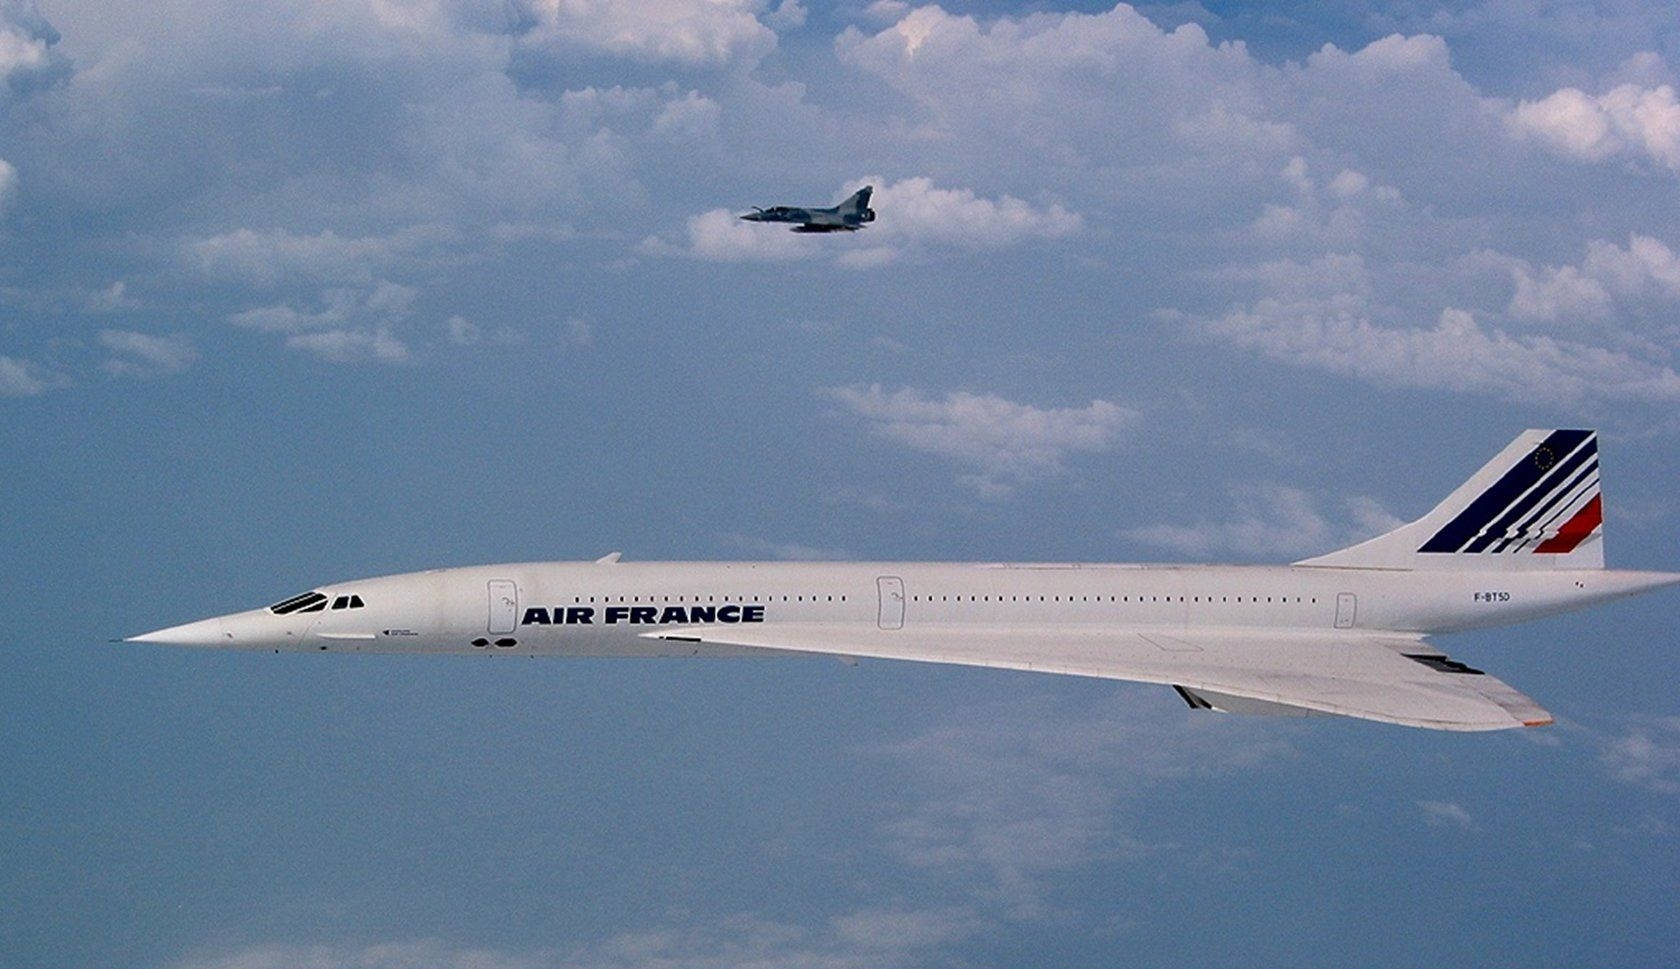 Air France Concorde Supersonic Airliner Wallpaper